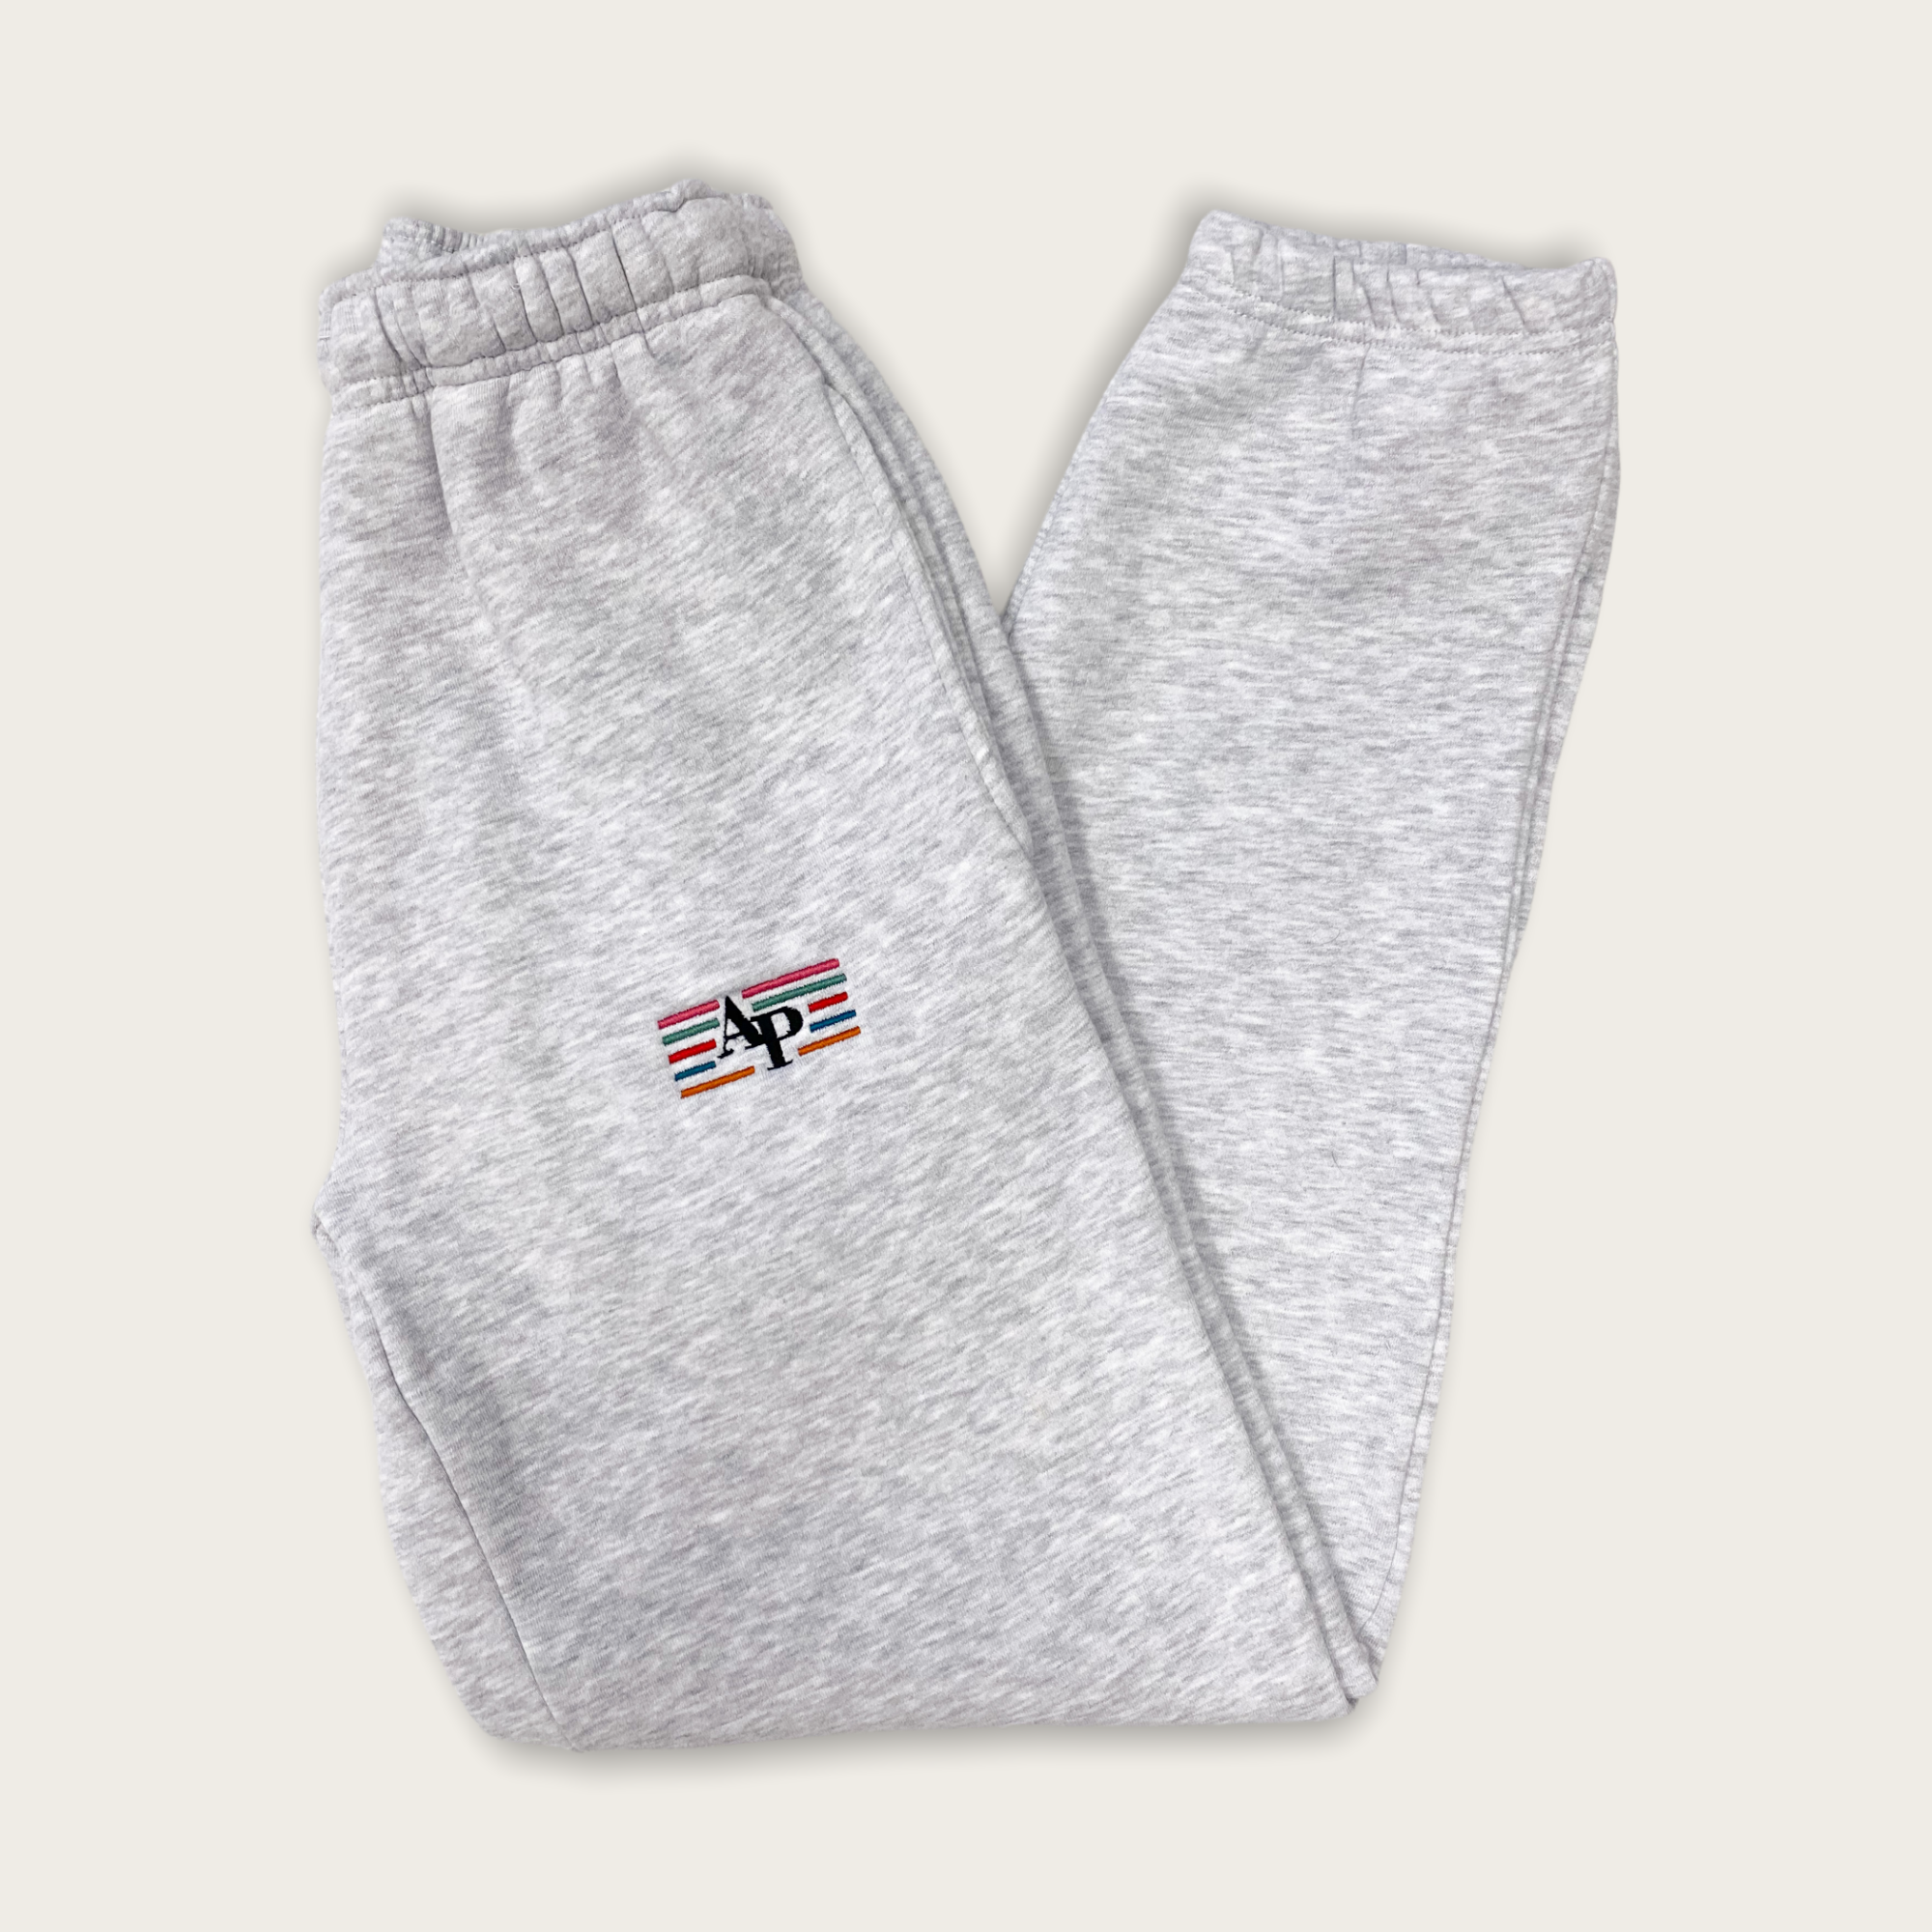 Embroidered Unisex Joggers - Classic Collection - Stripes